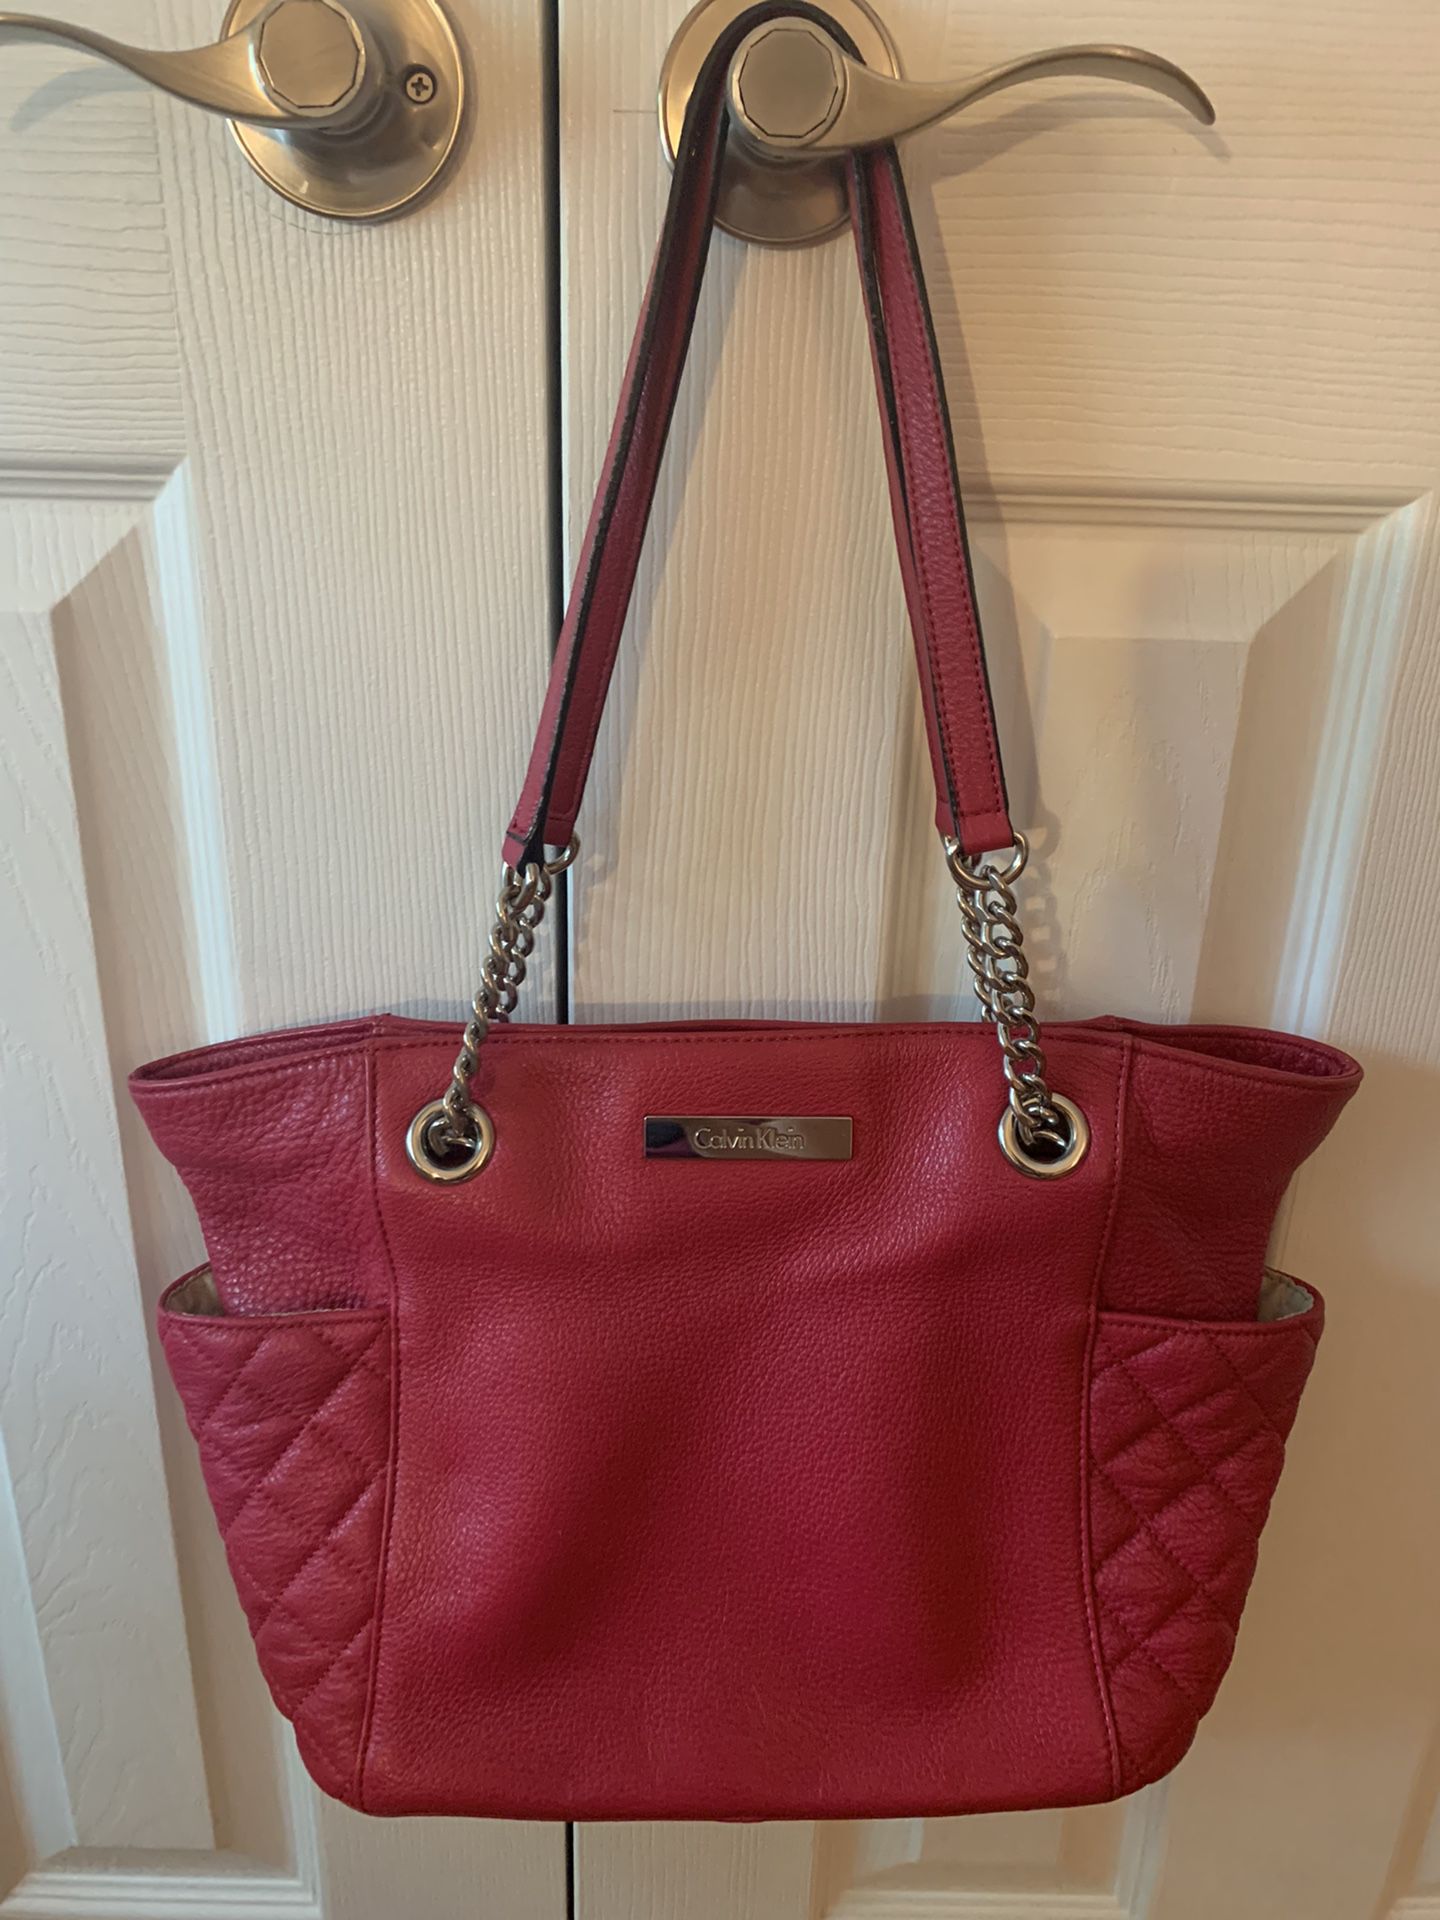 CALVIN KLEIN Pebbled Leather Berry Tote